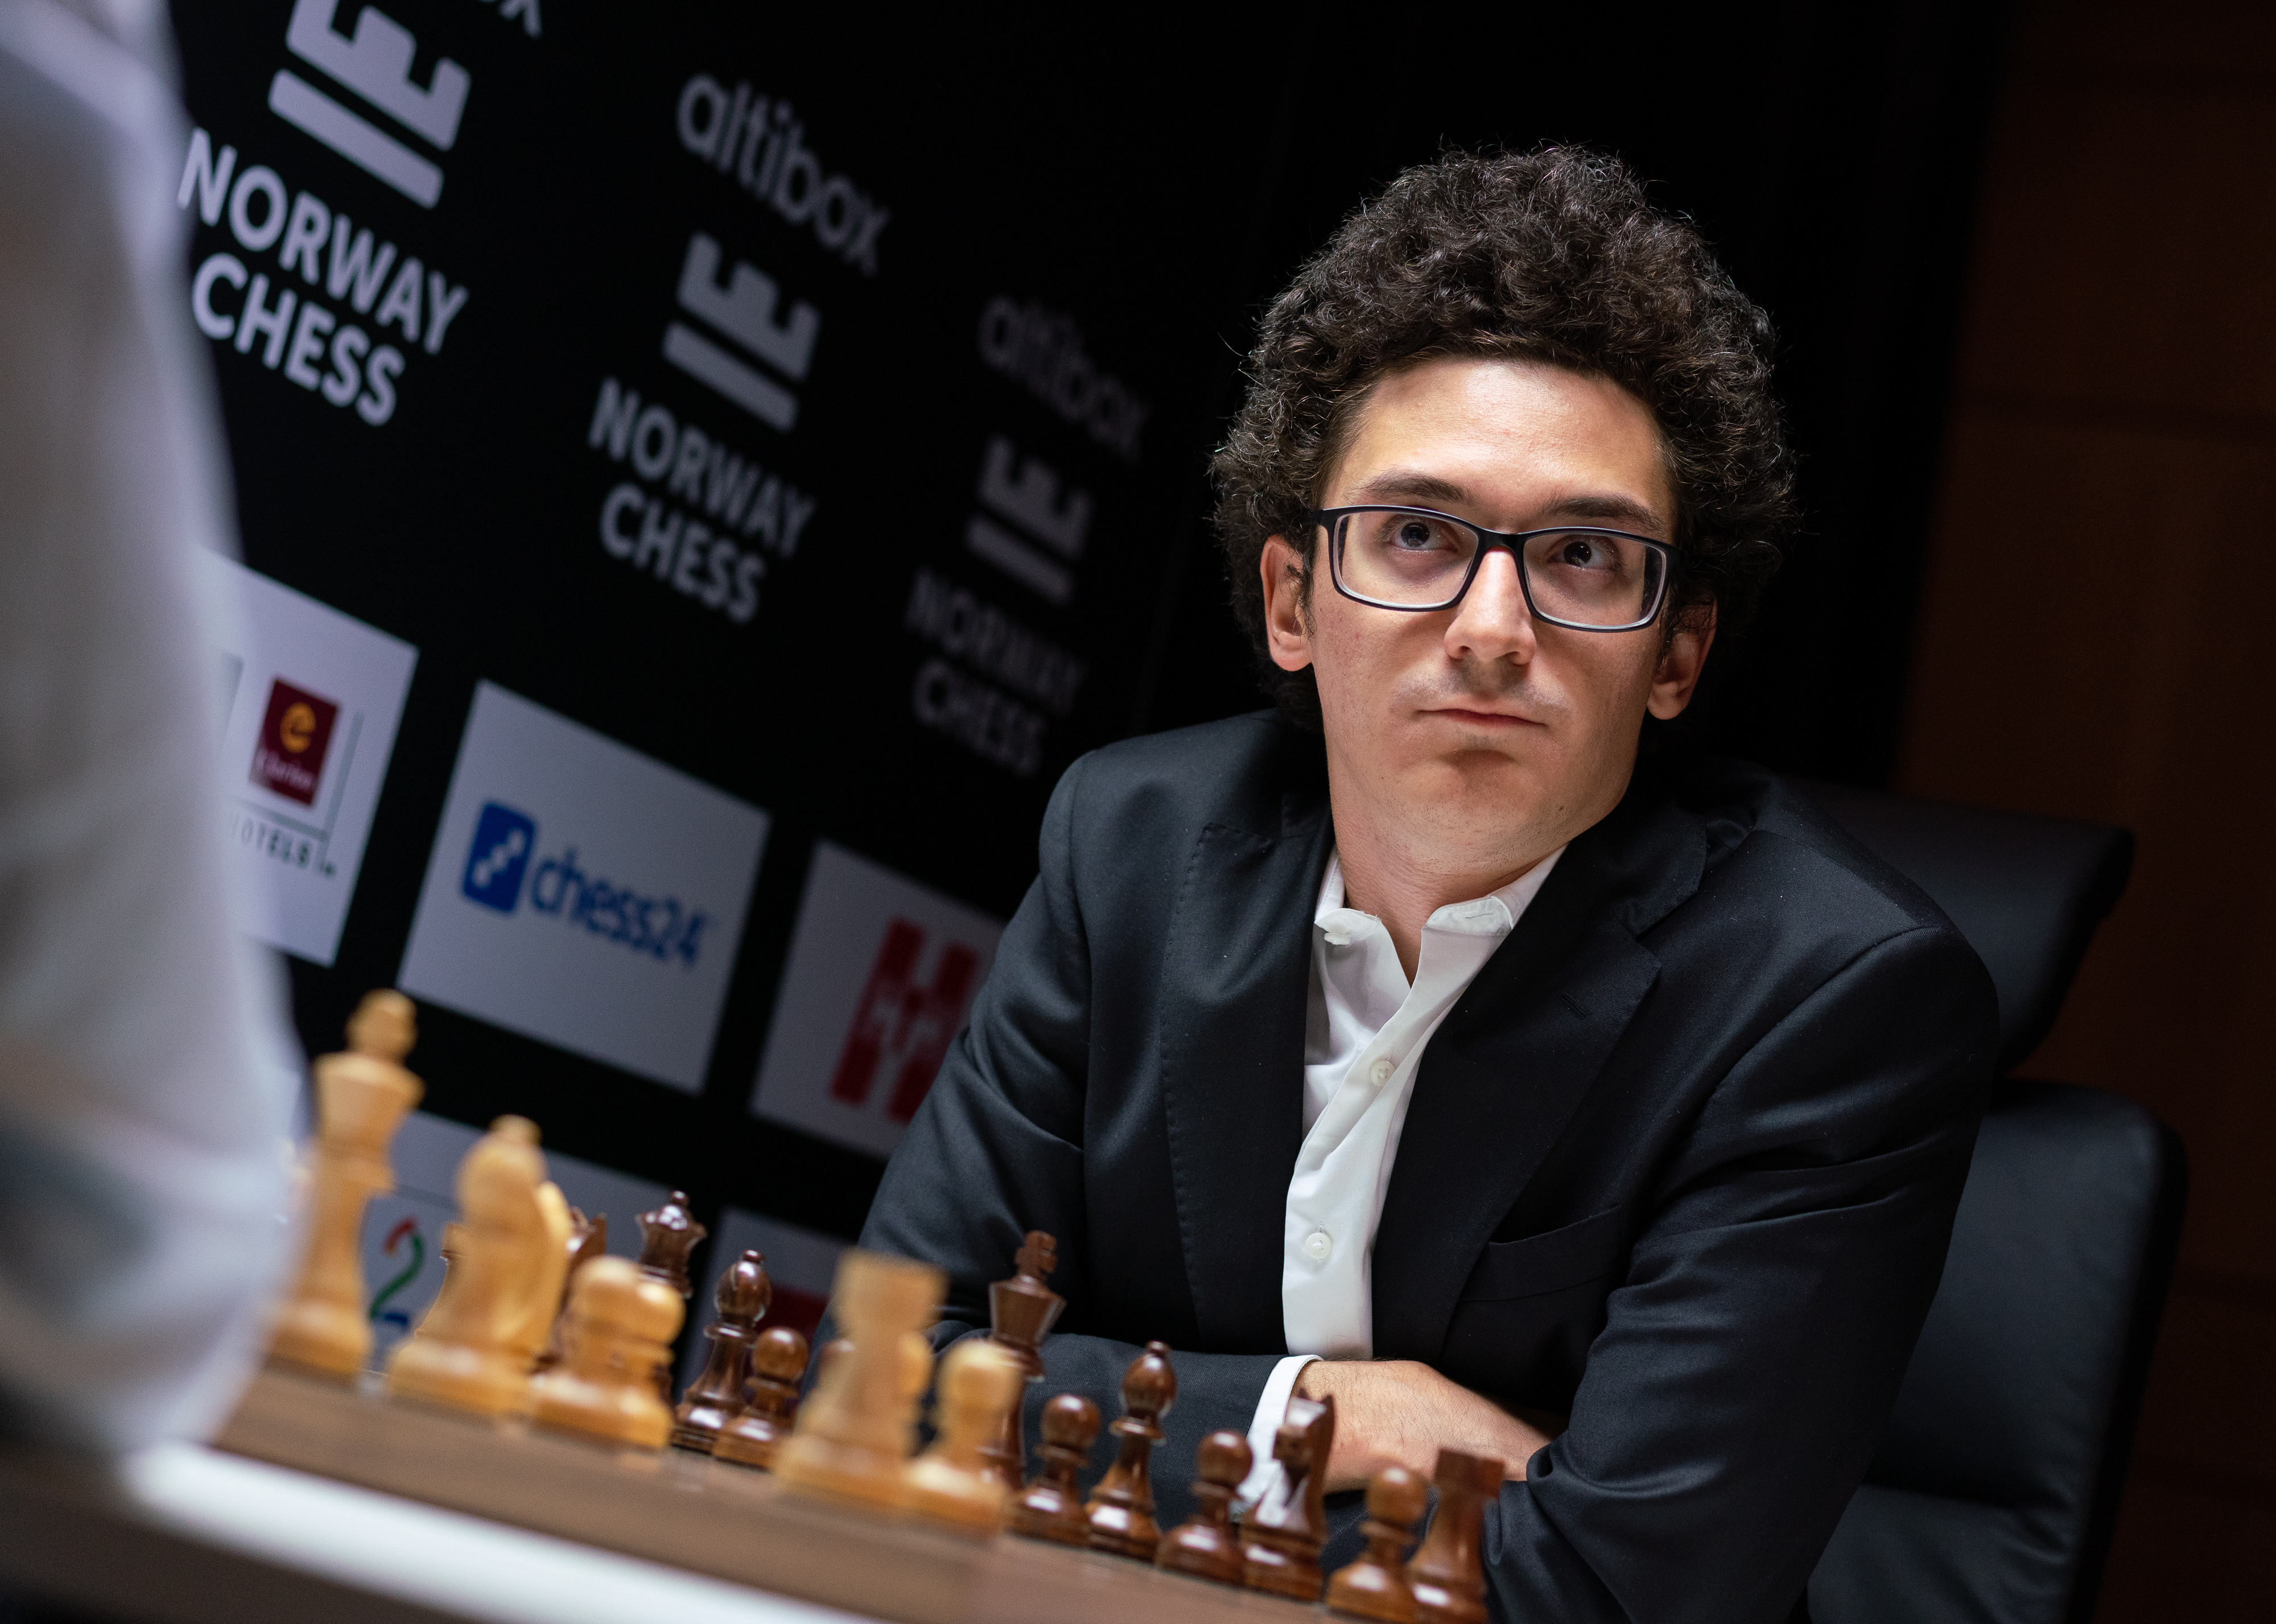 Mohammadreza Firouzja on X: 🔥Second place before the world champion in  Norway Super Tournament at the age of 17. He obviously deserved more but  still ! Just incredible and he is the